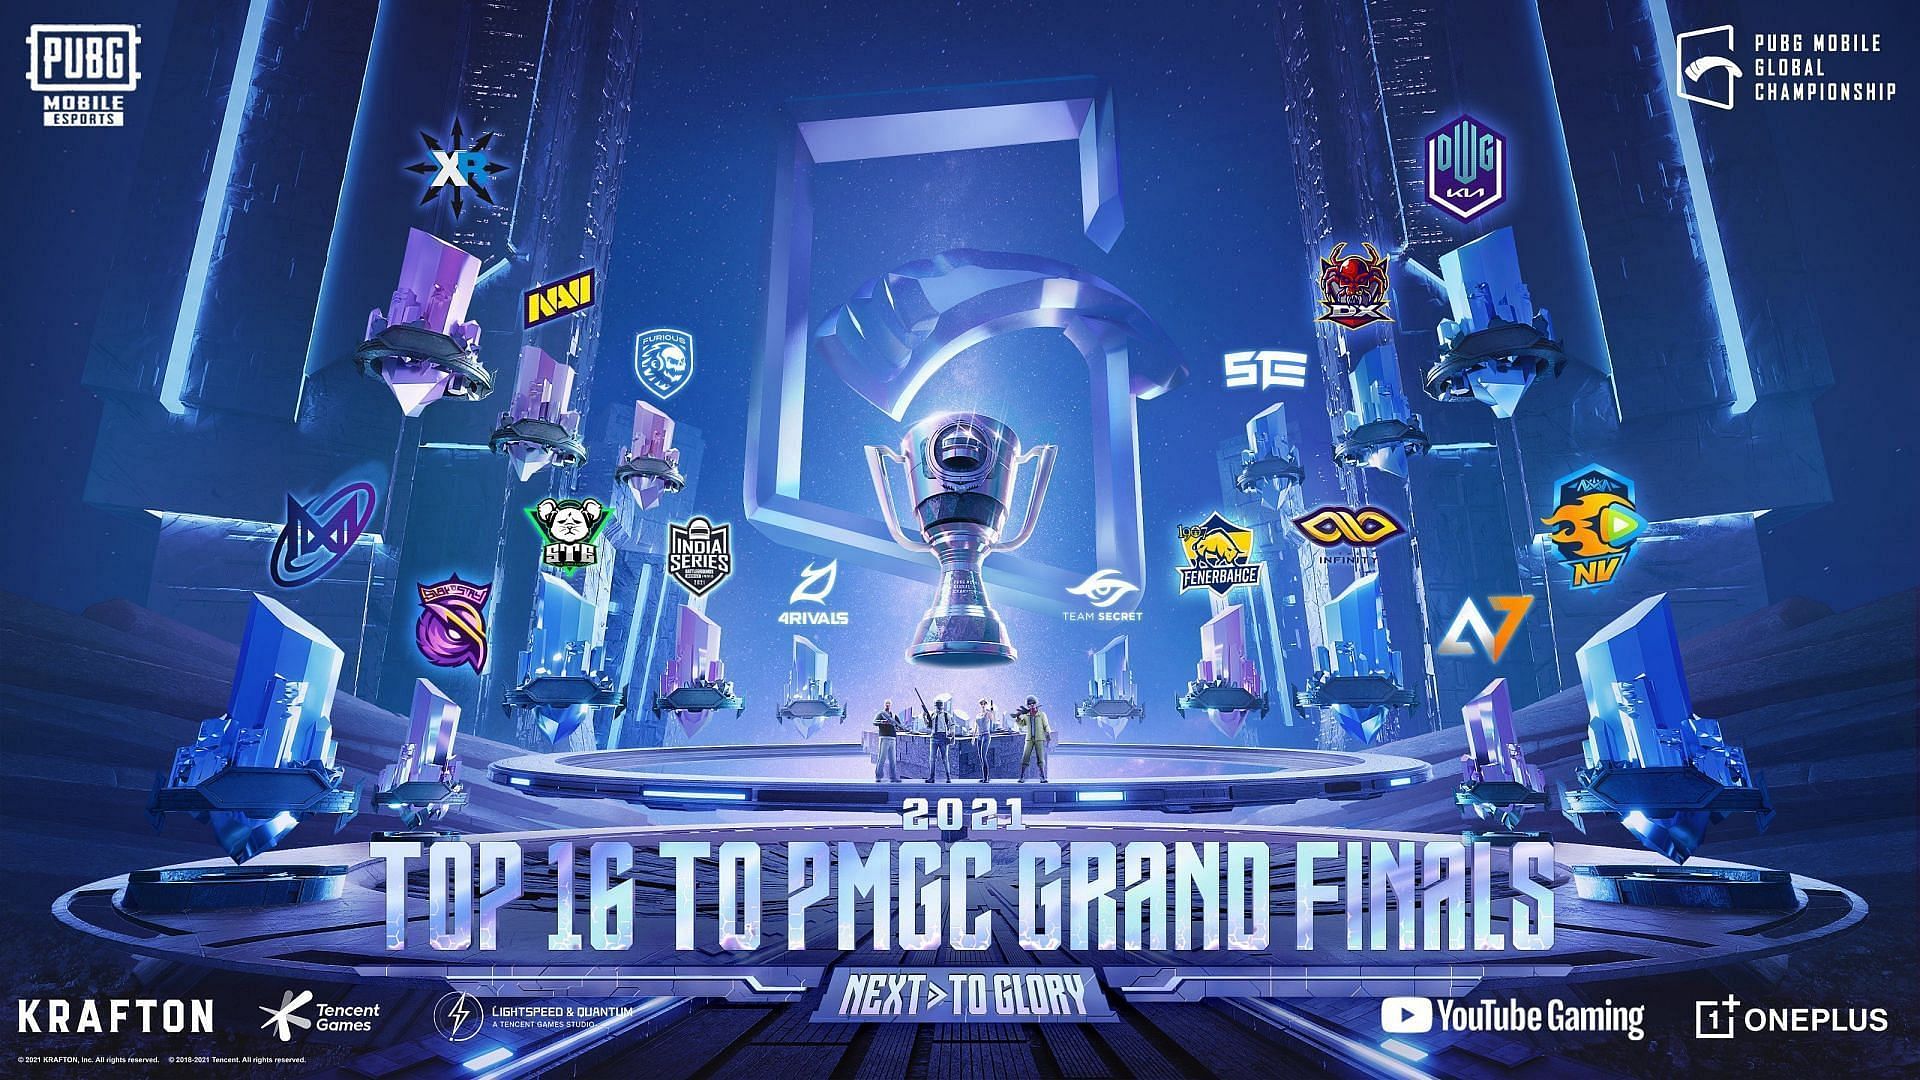 Looking at the drop location of the 16 PUBG Mobile teams in the PMGC Grand Finals (Image via Krafton)